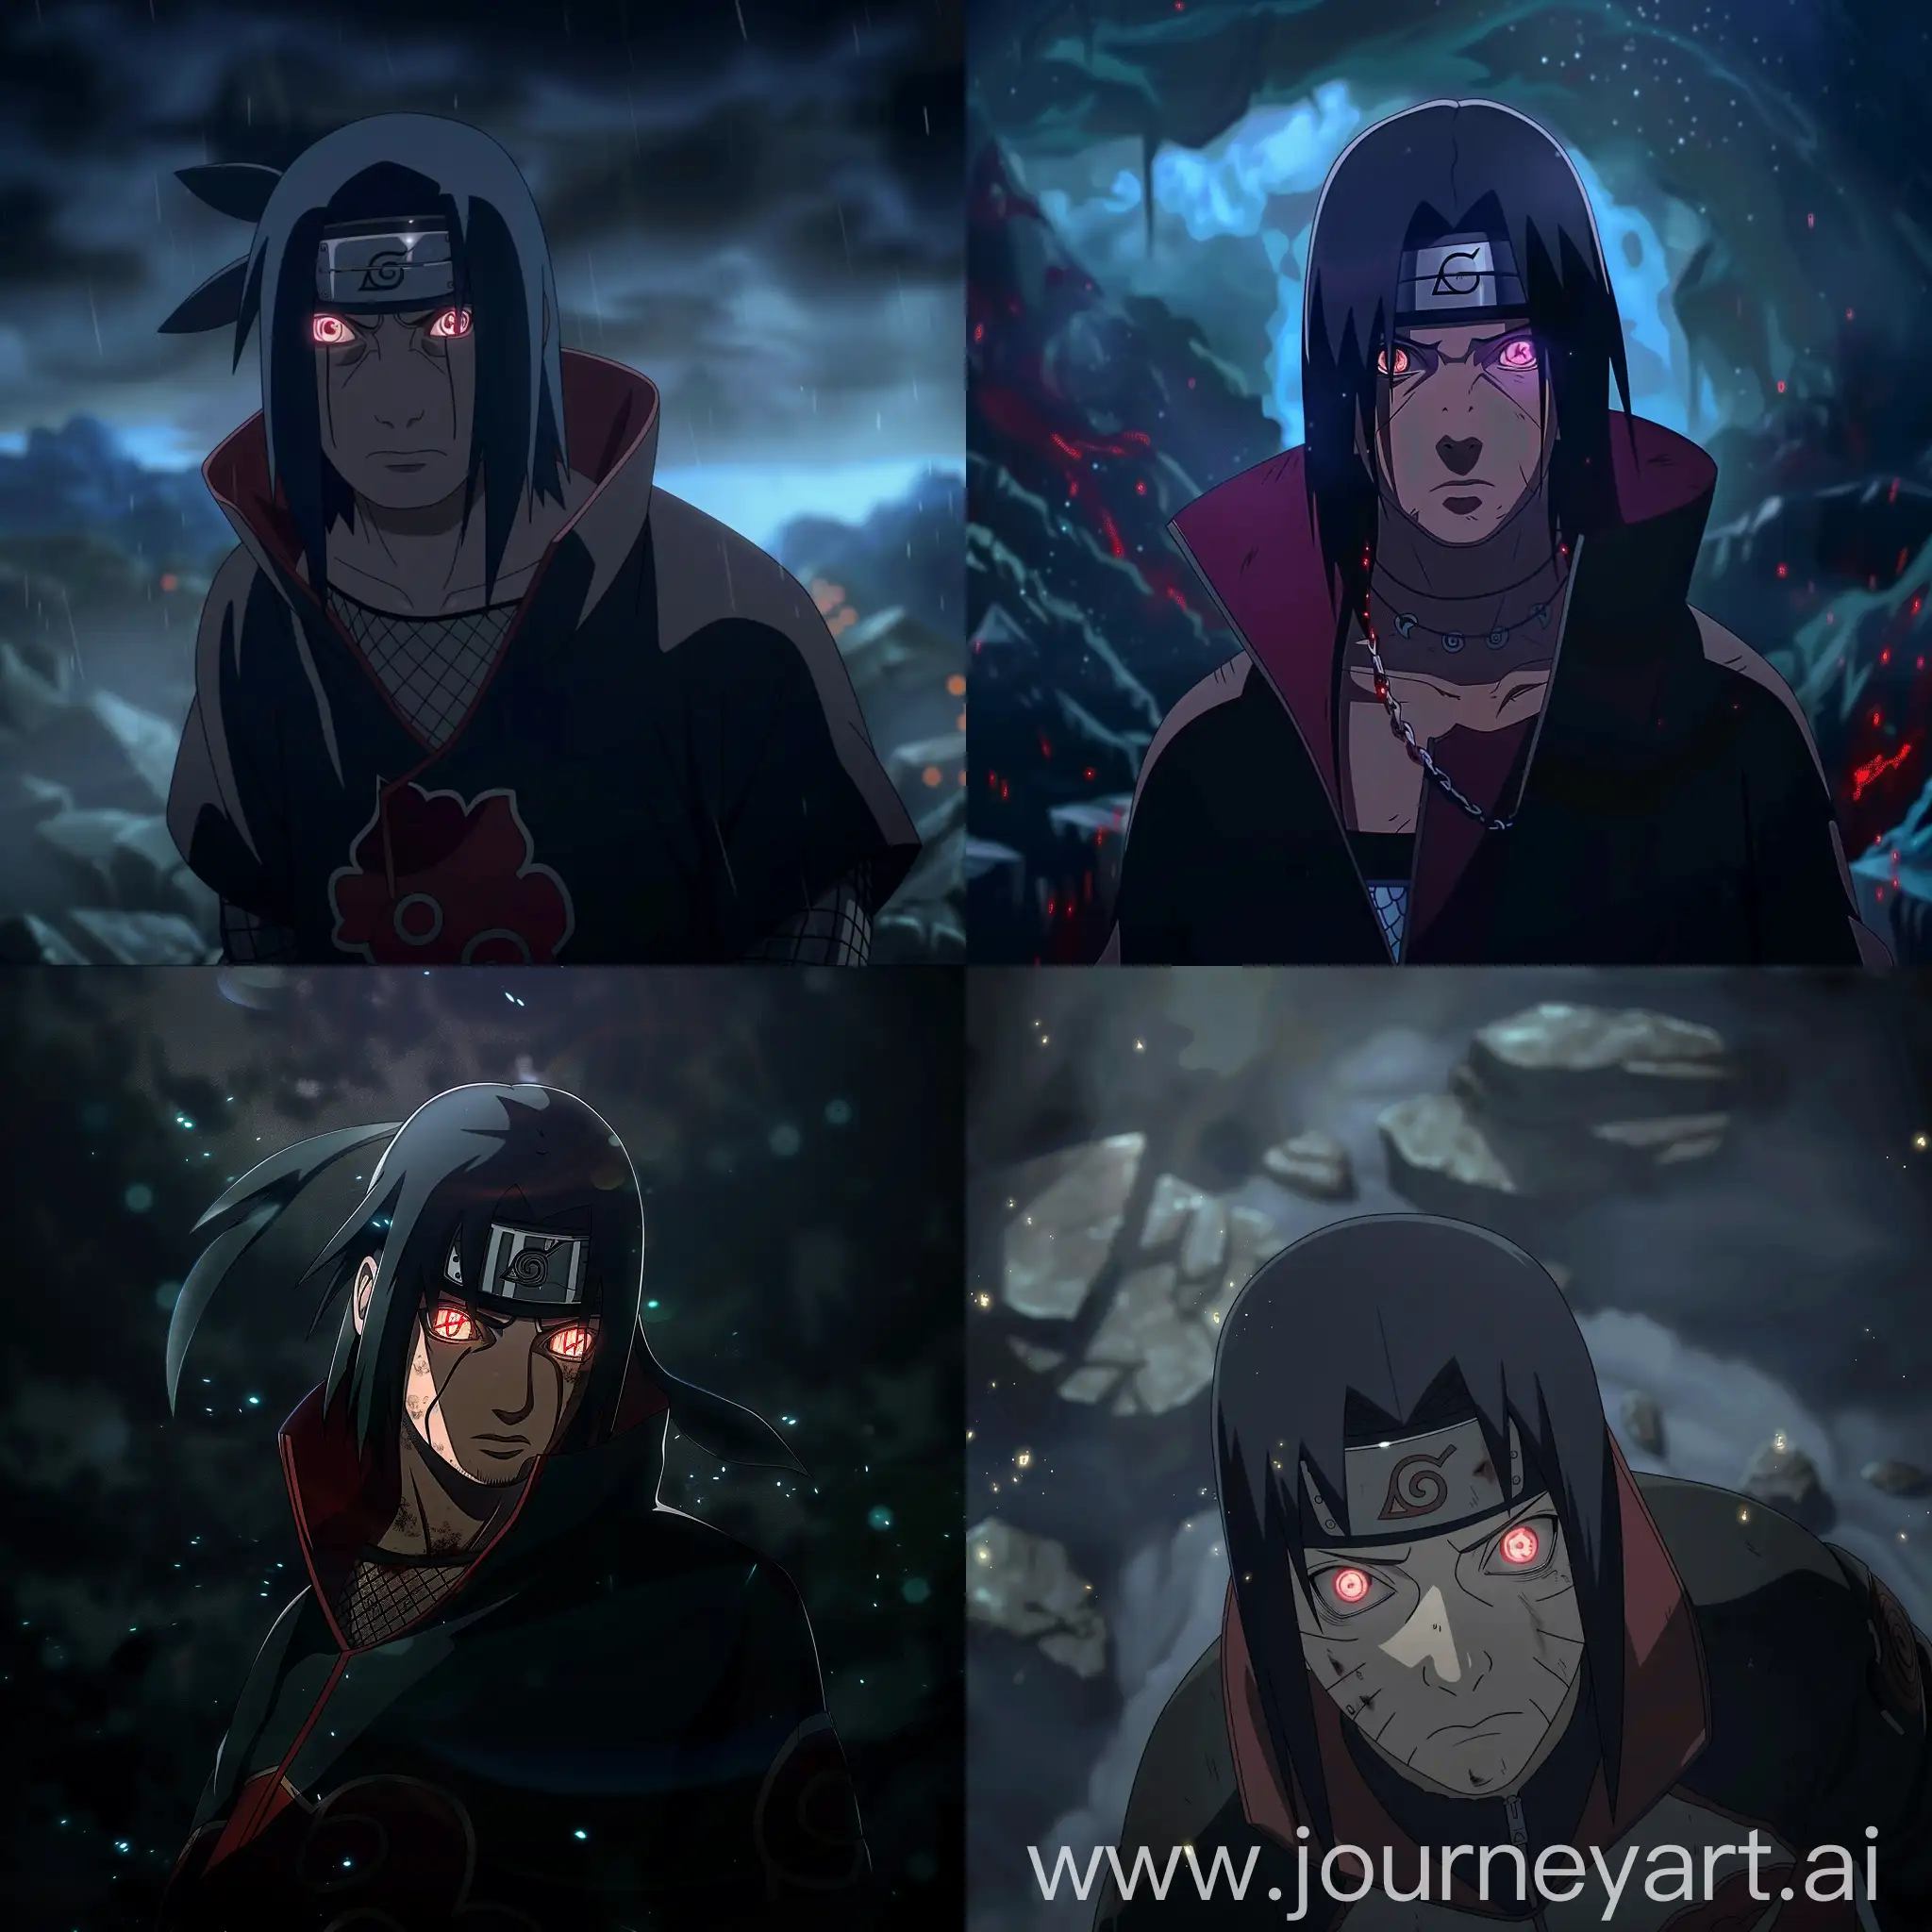 Mysterious-Itachi-Uchiha-from-Naruto-in-a-Dark-Eerie-Setting-with-Luminous-Eyes